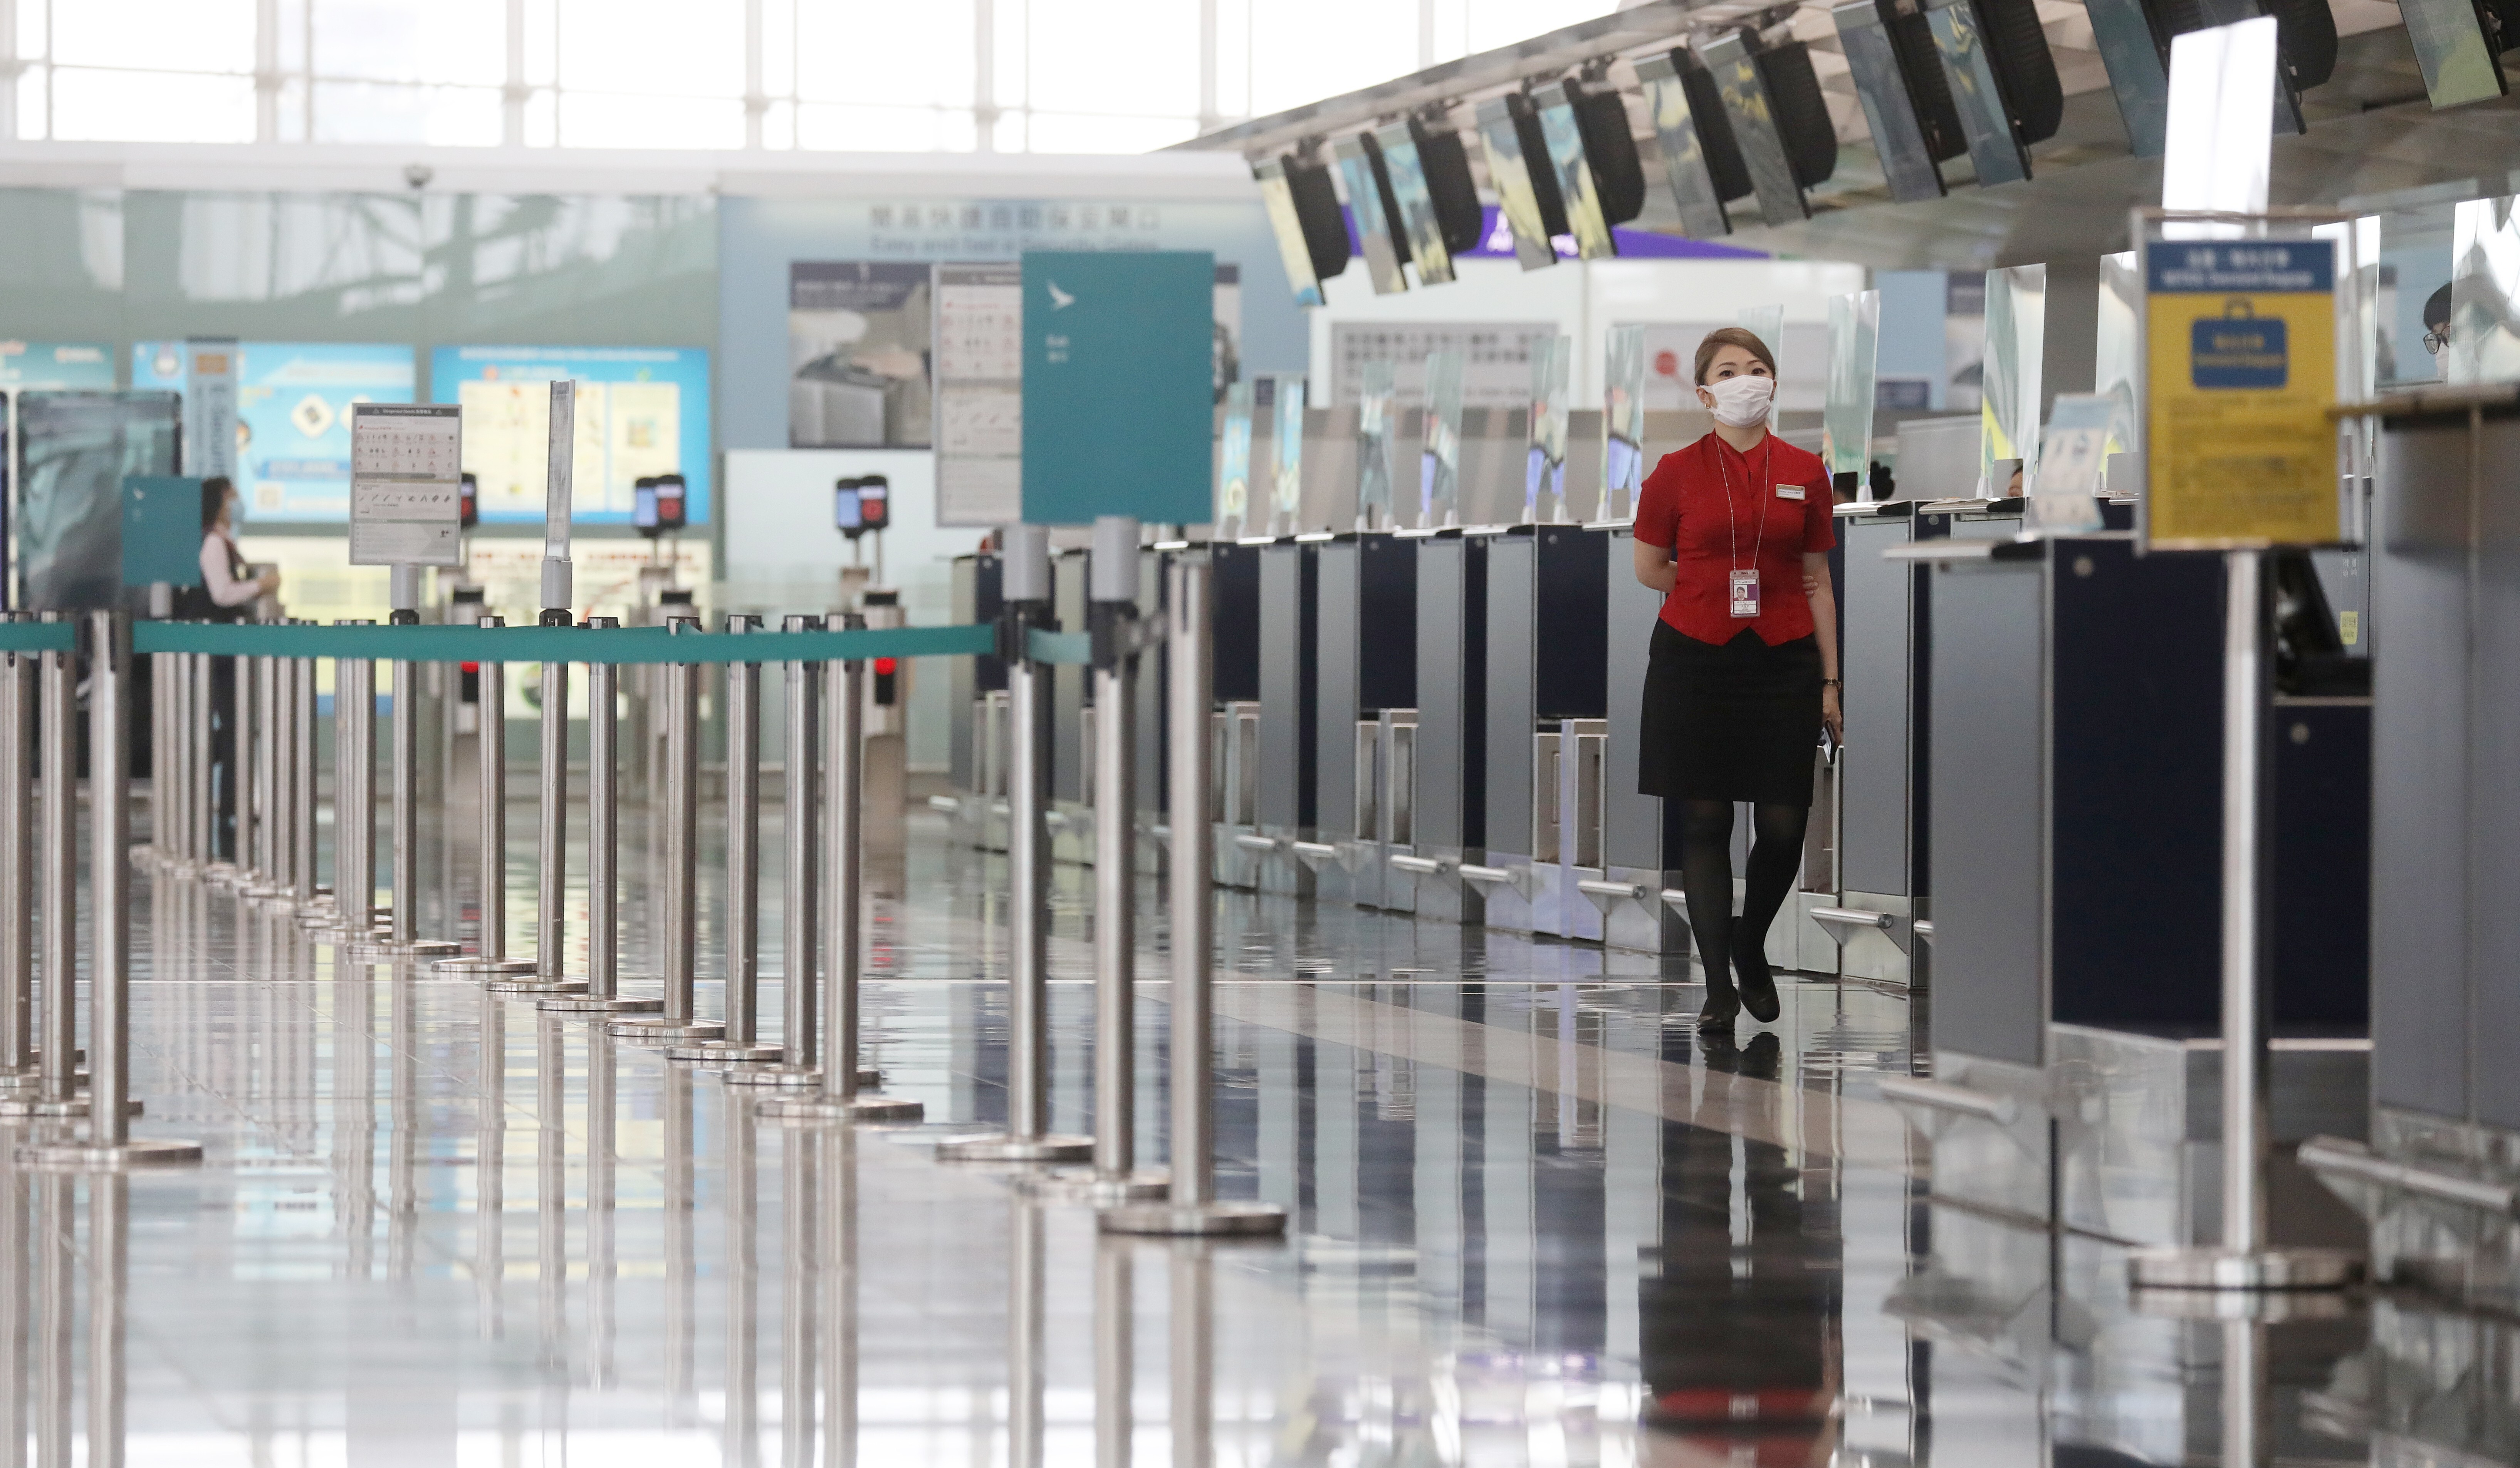 A Cathay Pacific staff member walks past the airlines' check in counter at terminal 1 of the Hong Kong International Airport in Chek Lap Kok in June 2020. The airline industry has continued to suffer from travel restrictions, border closures and quarantine measures to contain the Covid-19 pandemic. Photo: Sam Tsang